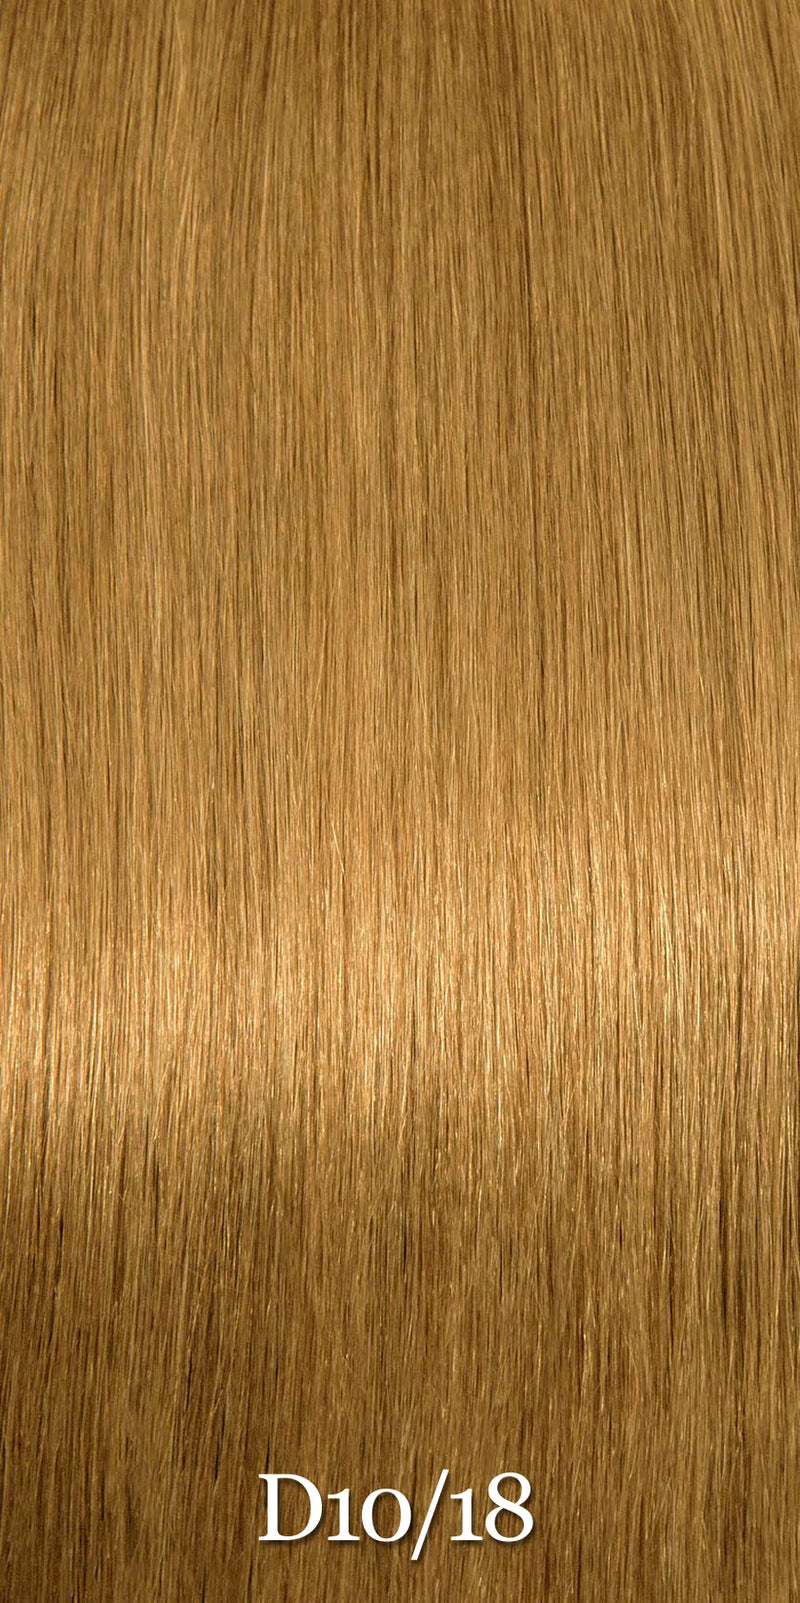 Bohyme Luxe Machine-tied Silky Straight 14"